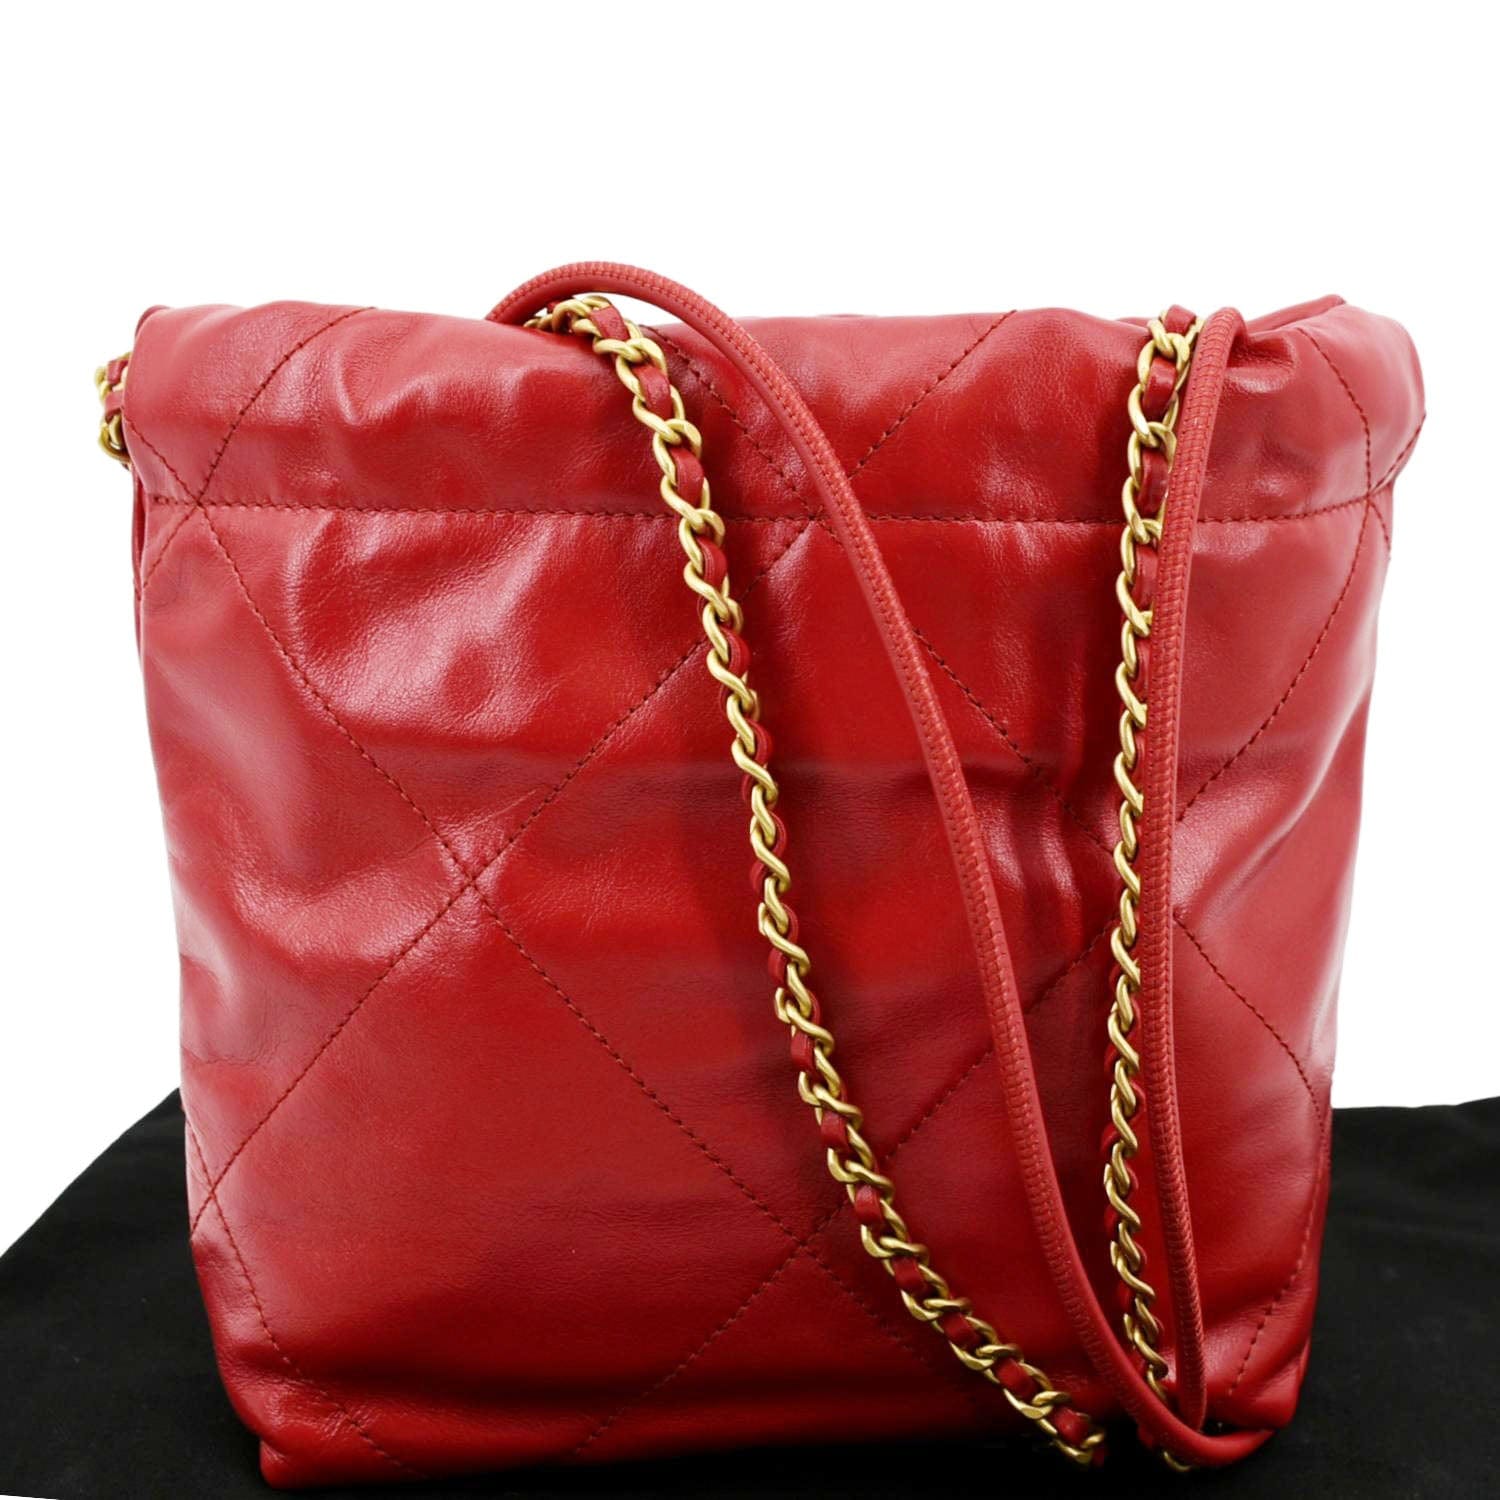 Chanel Large Chain Around Limited Edition Pristine Red Calfskin Leather Flap Bag